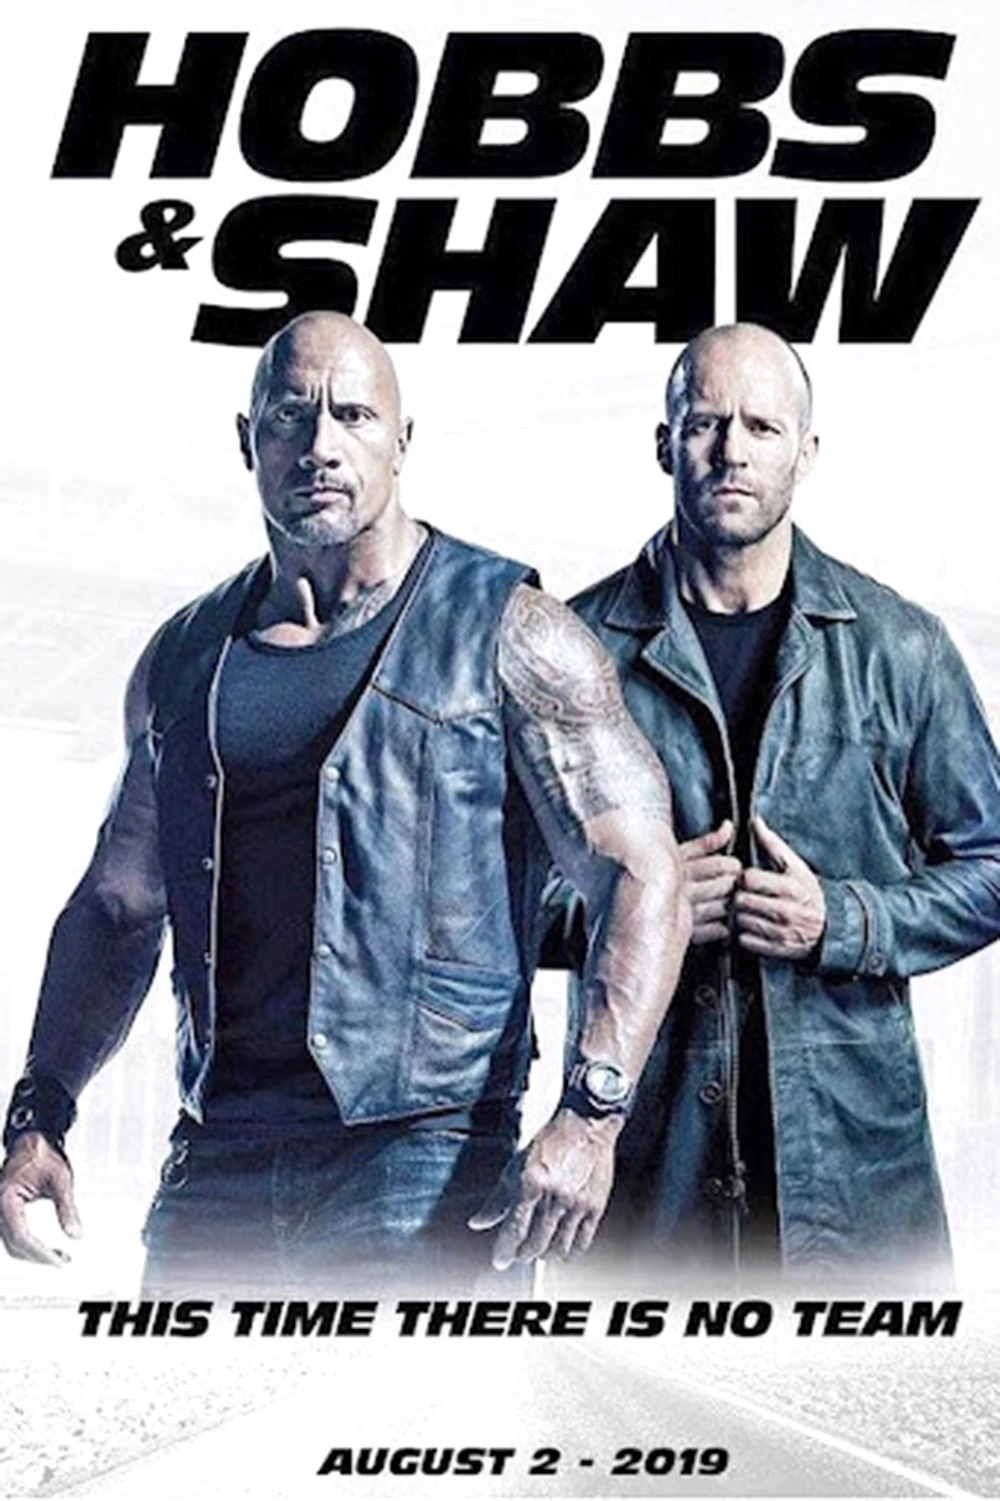 Poster phim Hobb and Shaw do The Rock sản xuất